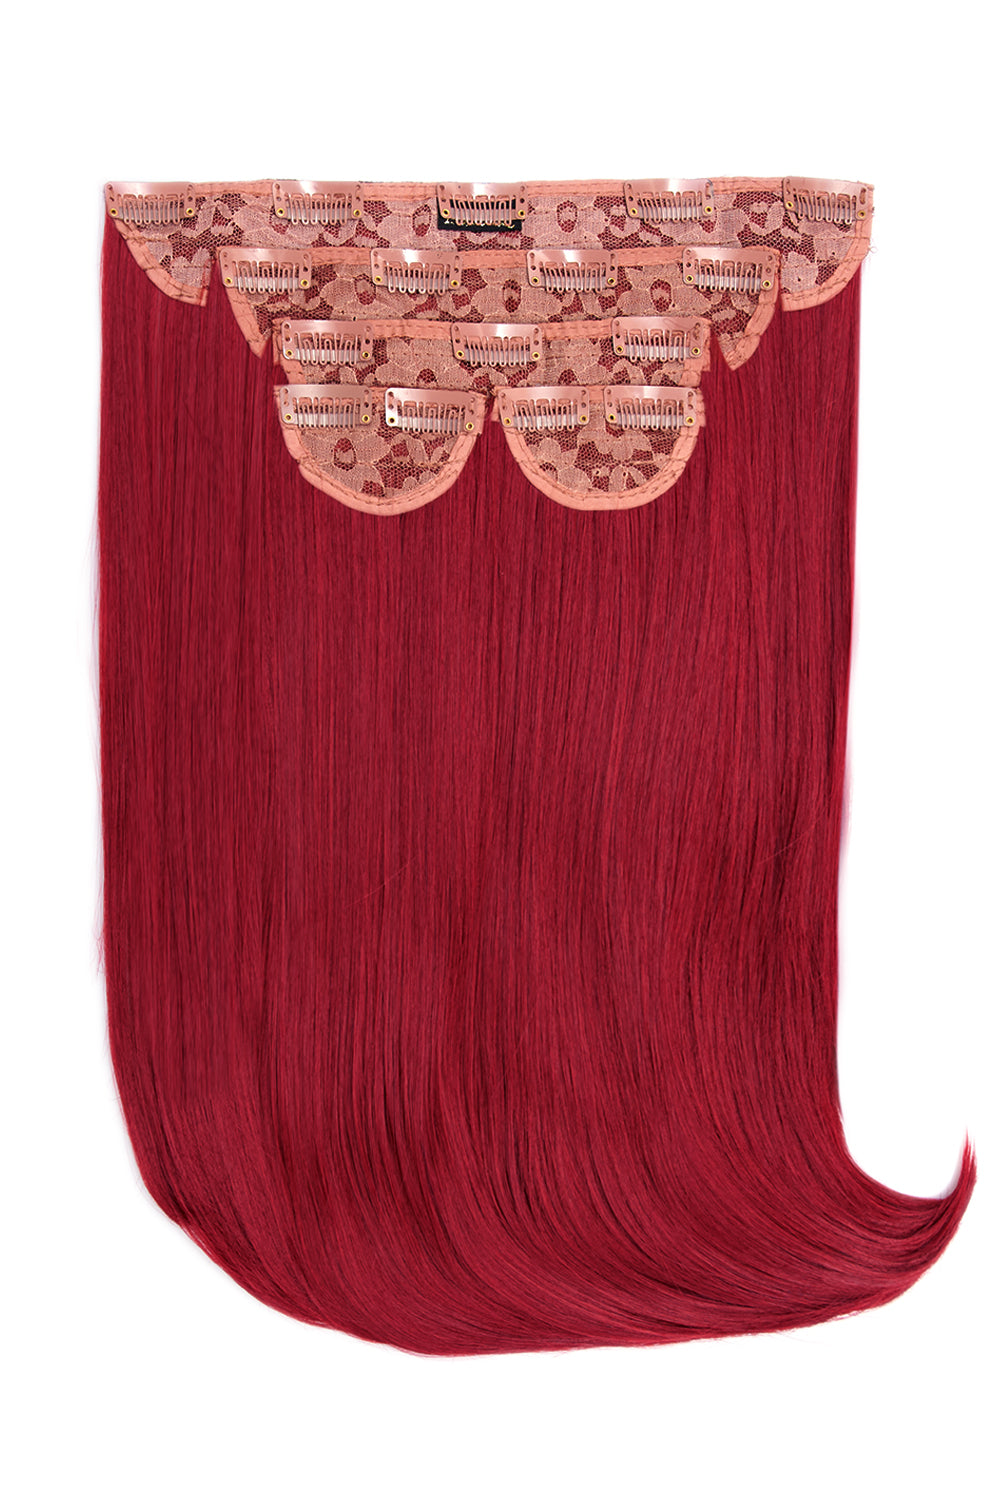 Super Thick 16" 5 Piece Curve Clip In Hair Extensions - Burgundy Ruby Red